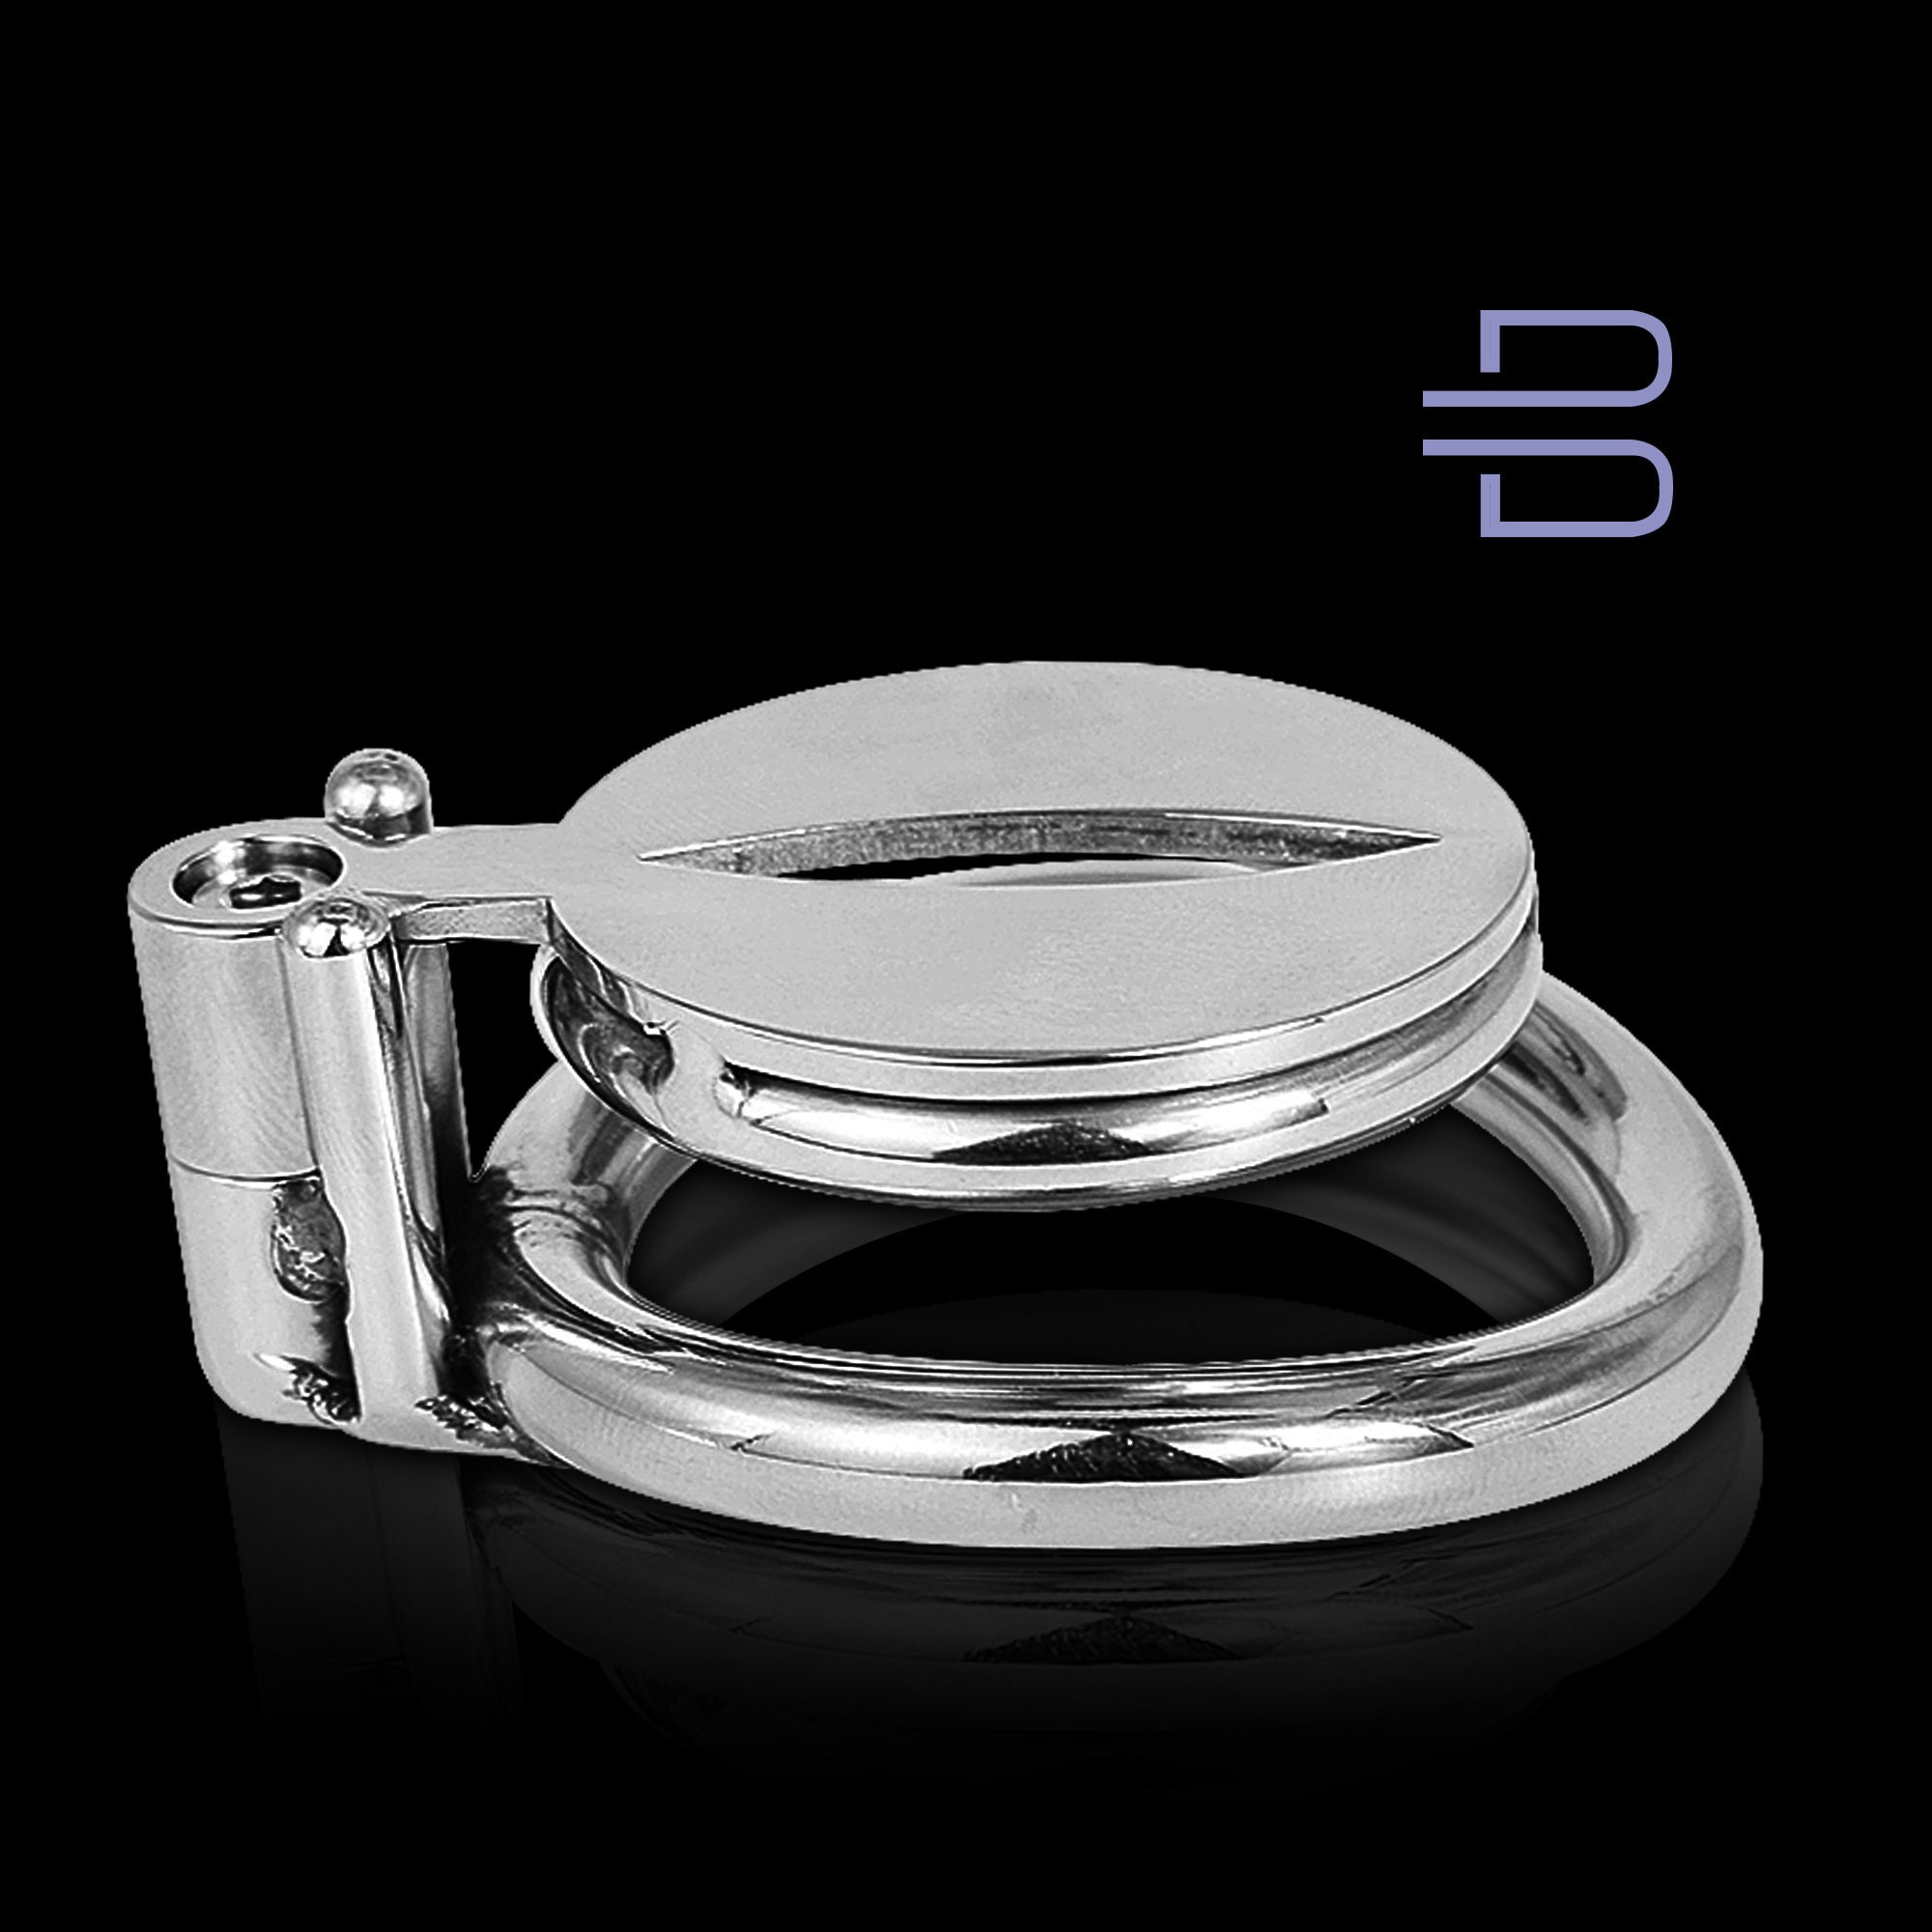 Stainless Steel Male Chastity Device with Silicone Urethral Sounds Catheter  Spike Ring Sex Toys for Men Chastity Belt Penis Lock Cage (Base Ring 50mm)